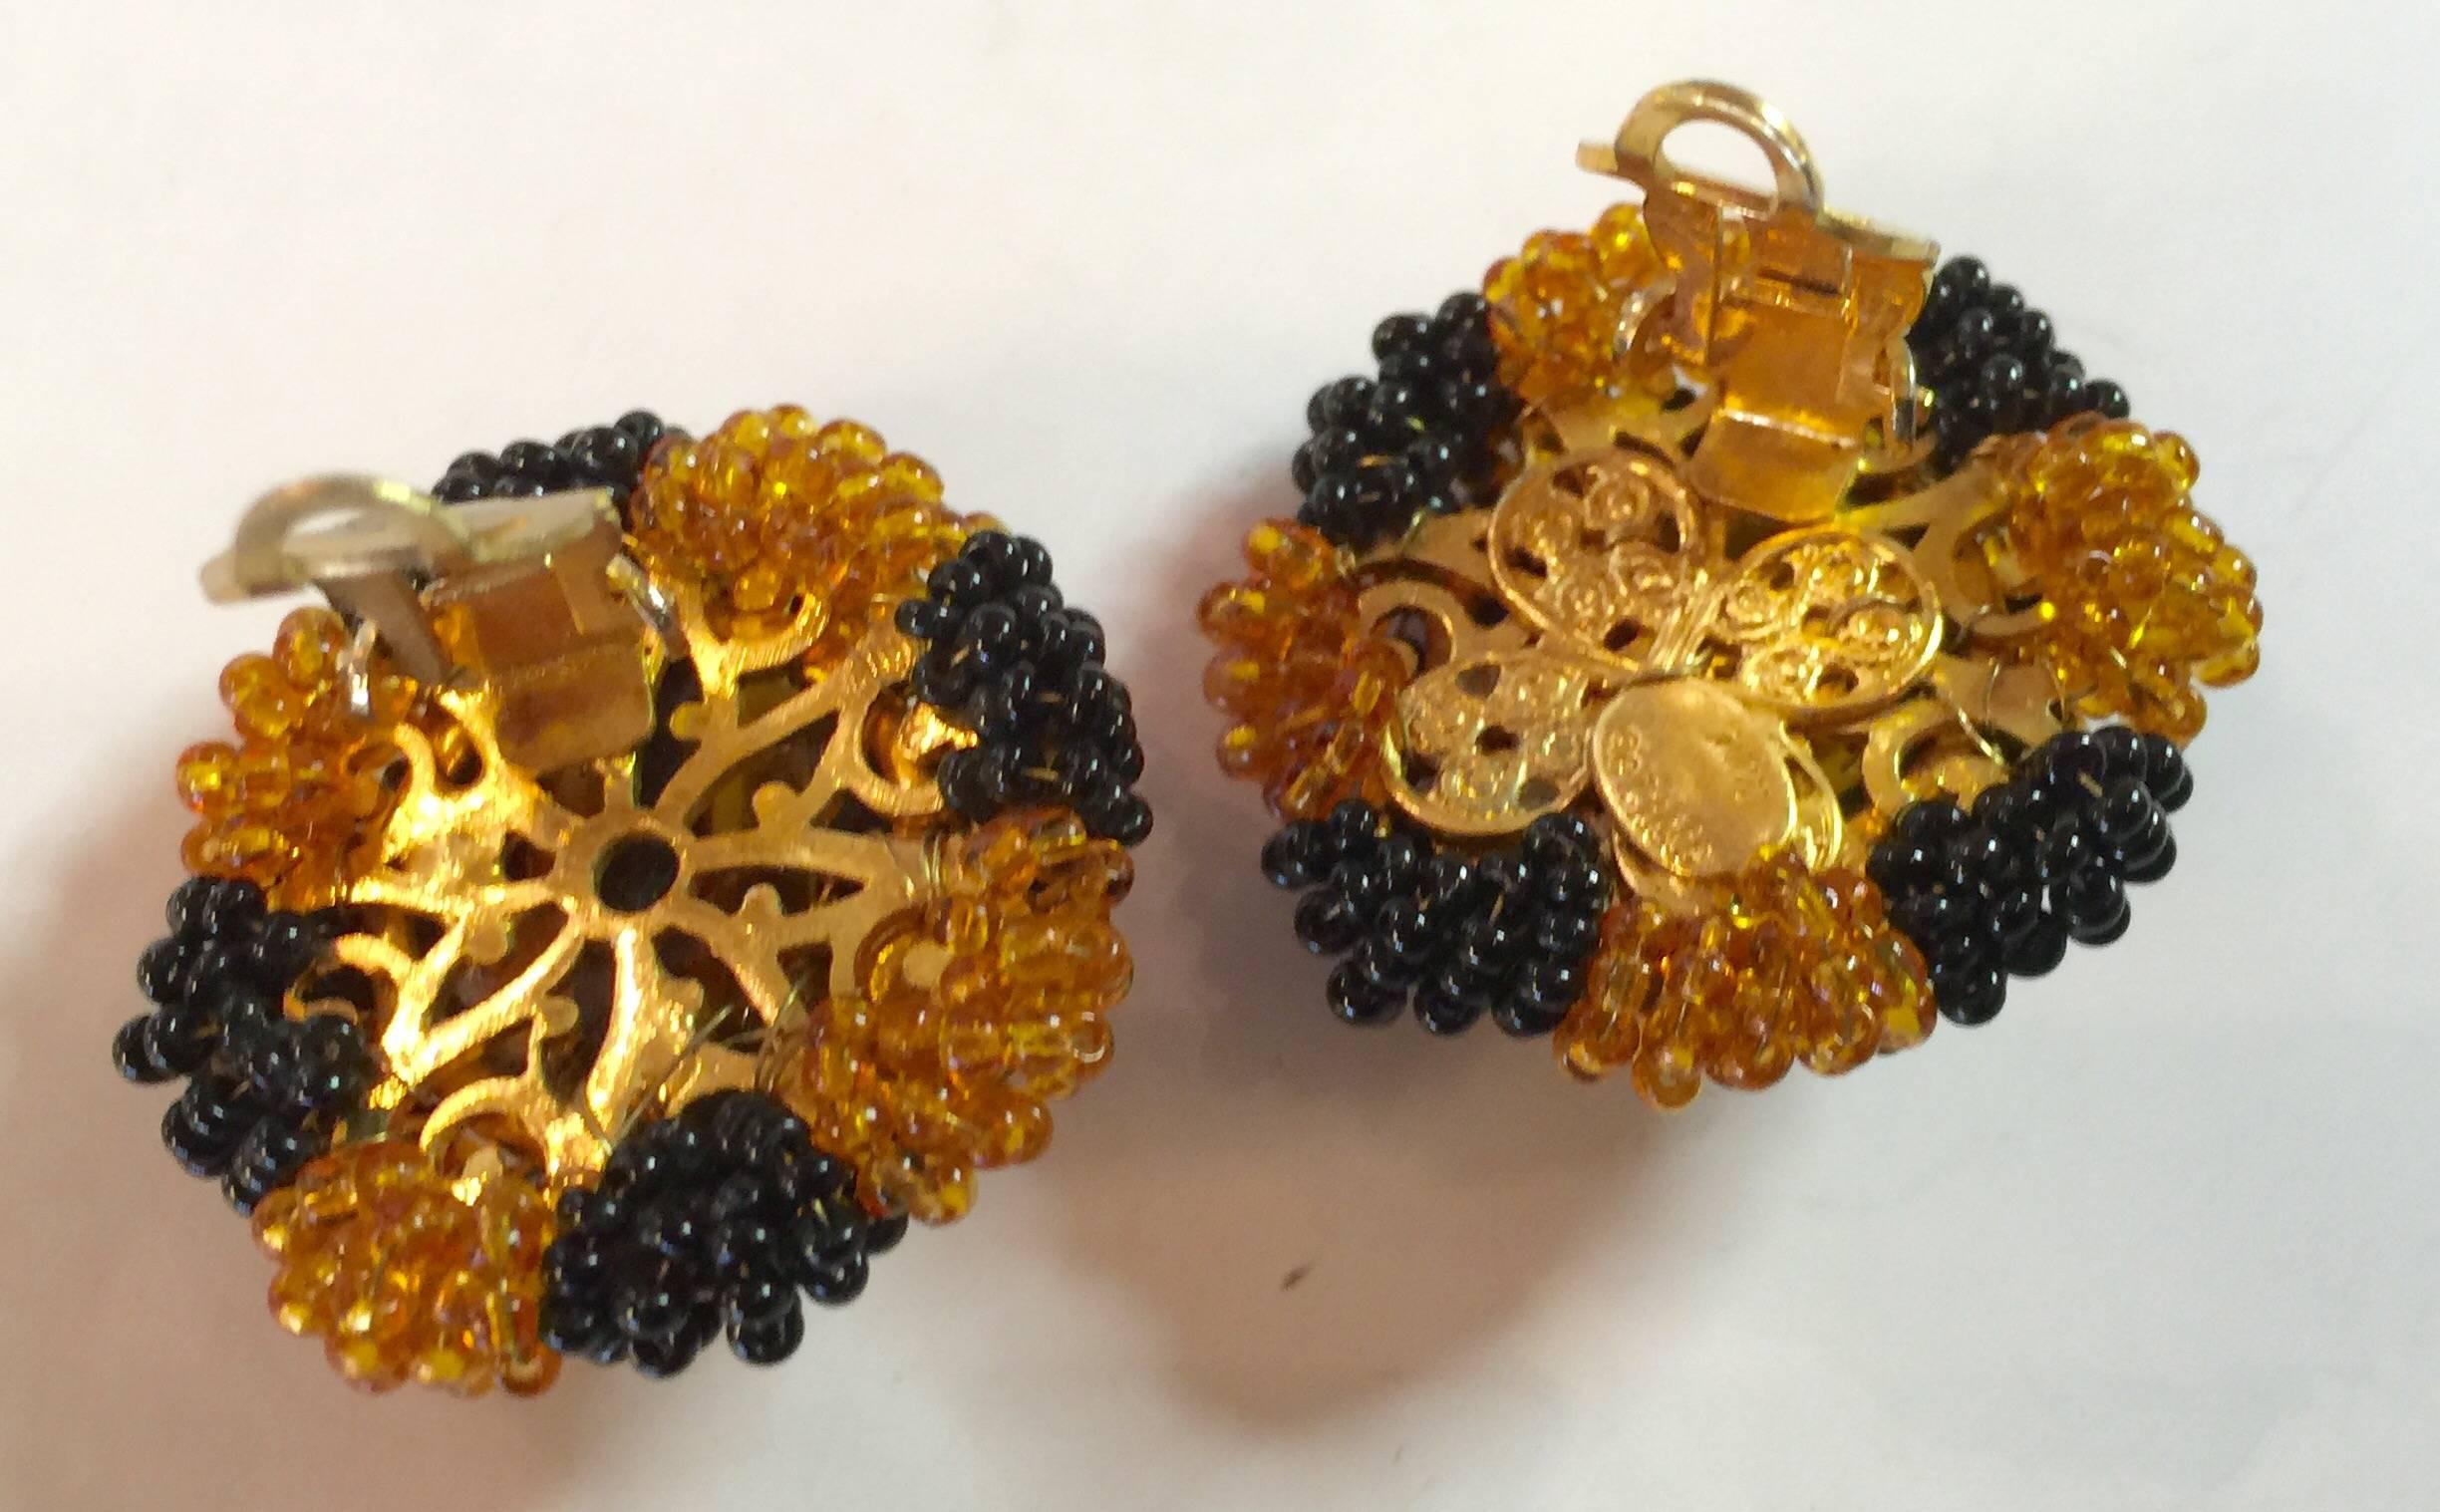 These lovely earrings by deLillo bear a strong ressemblance to the work of Miriam Haskell, whose company was connected to de Lillo by his business associate and partner Robert Clark who had a longstanding association with Haskell. William de Lillo's